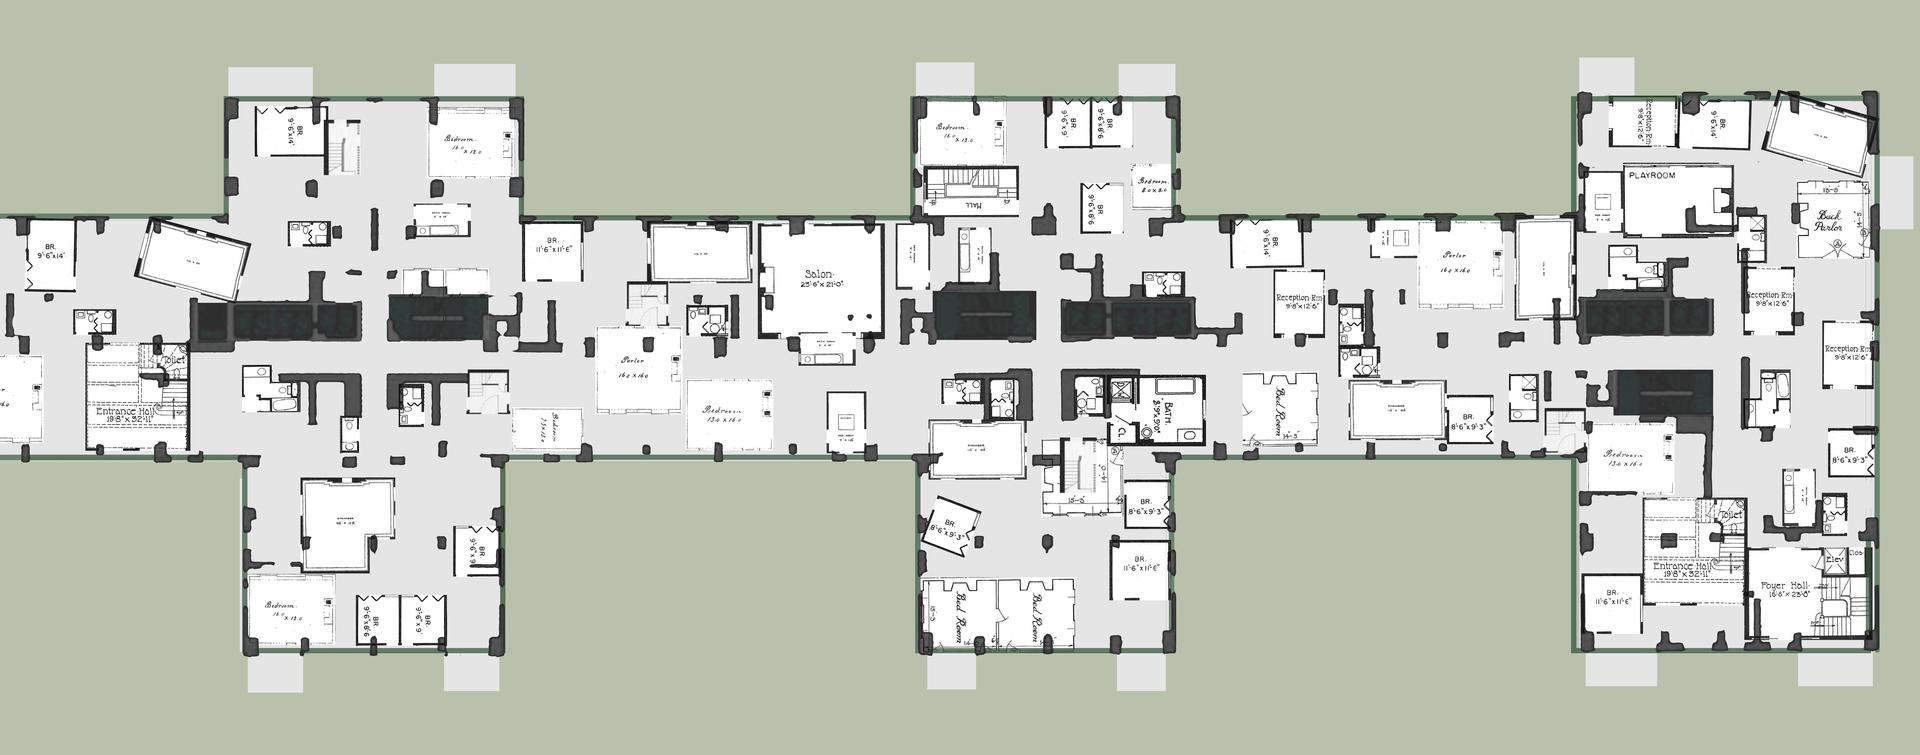 apply classical town house plan to existing floor plan